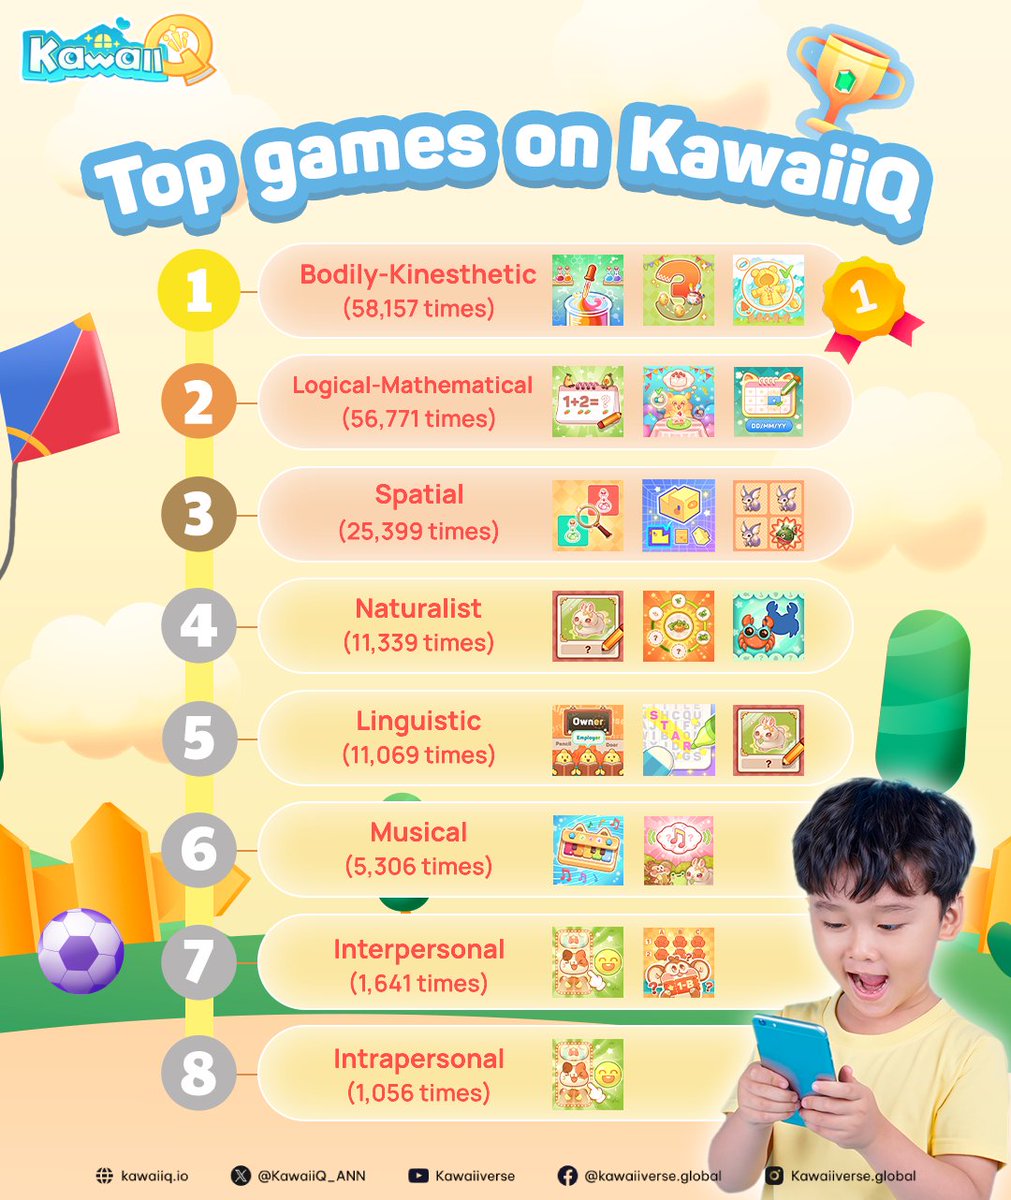 🪄Top Games Alert! Check out the most popular games on #KawaiiQ! 🎮 Do your little gamers love them too? Discover #fun and #educational #games that kids adore now at #KawaiiQ! 🔗link.kawaiiq.io/bOKYvB 🌟P.S. Give it a try, #free & ad-free, just pure learning fun! #Parenting